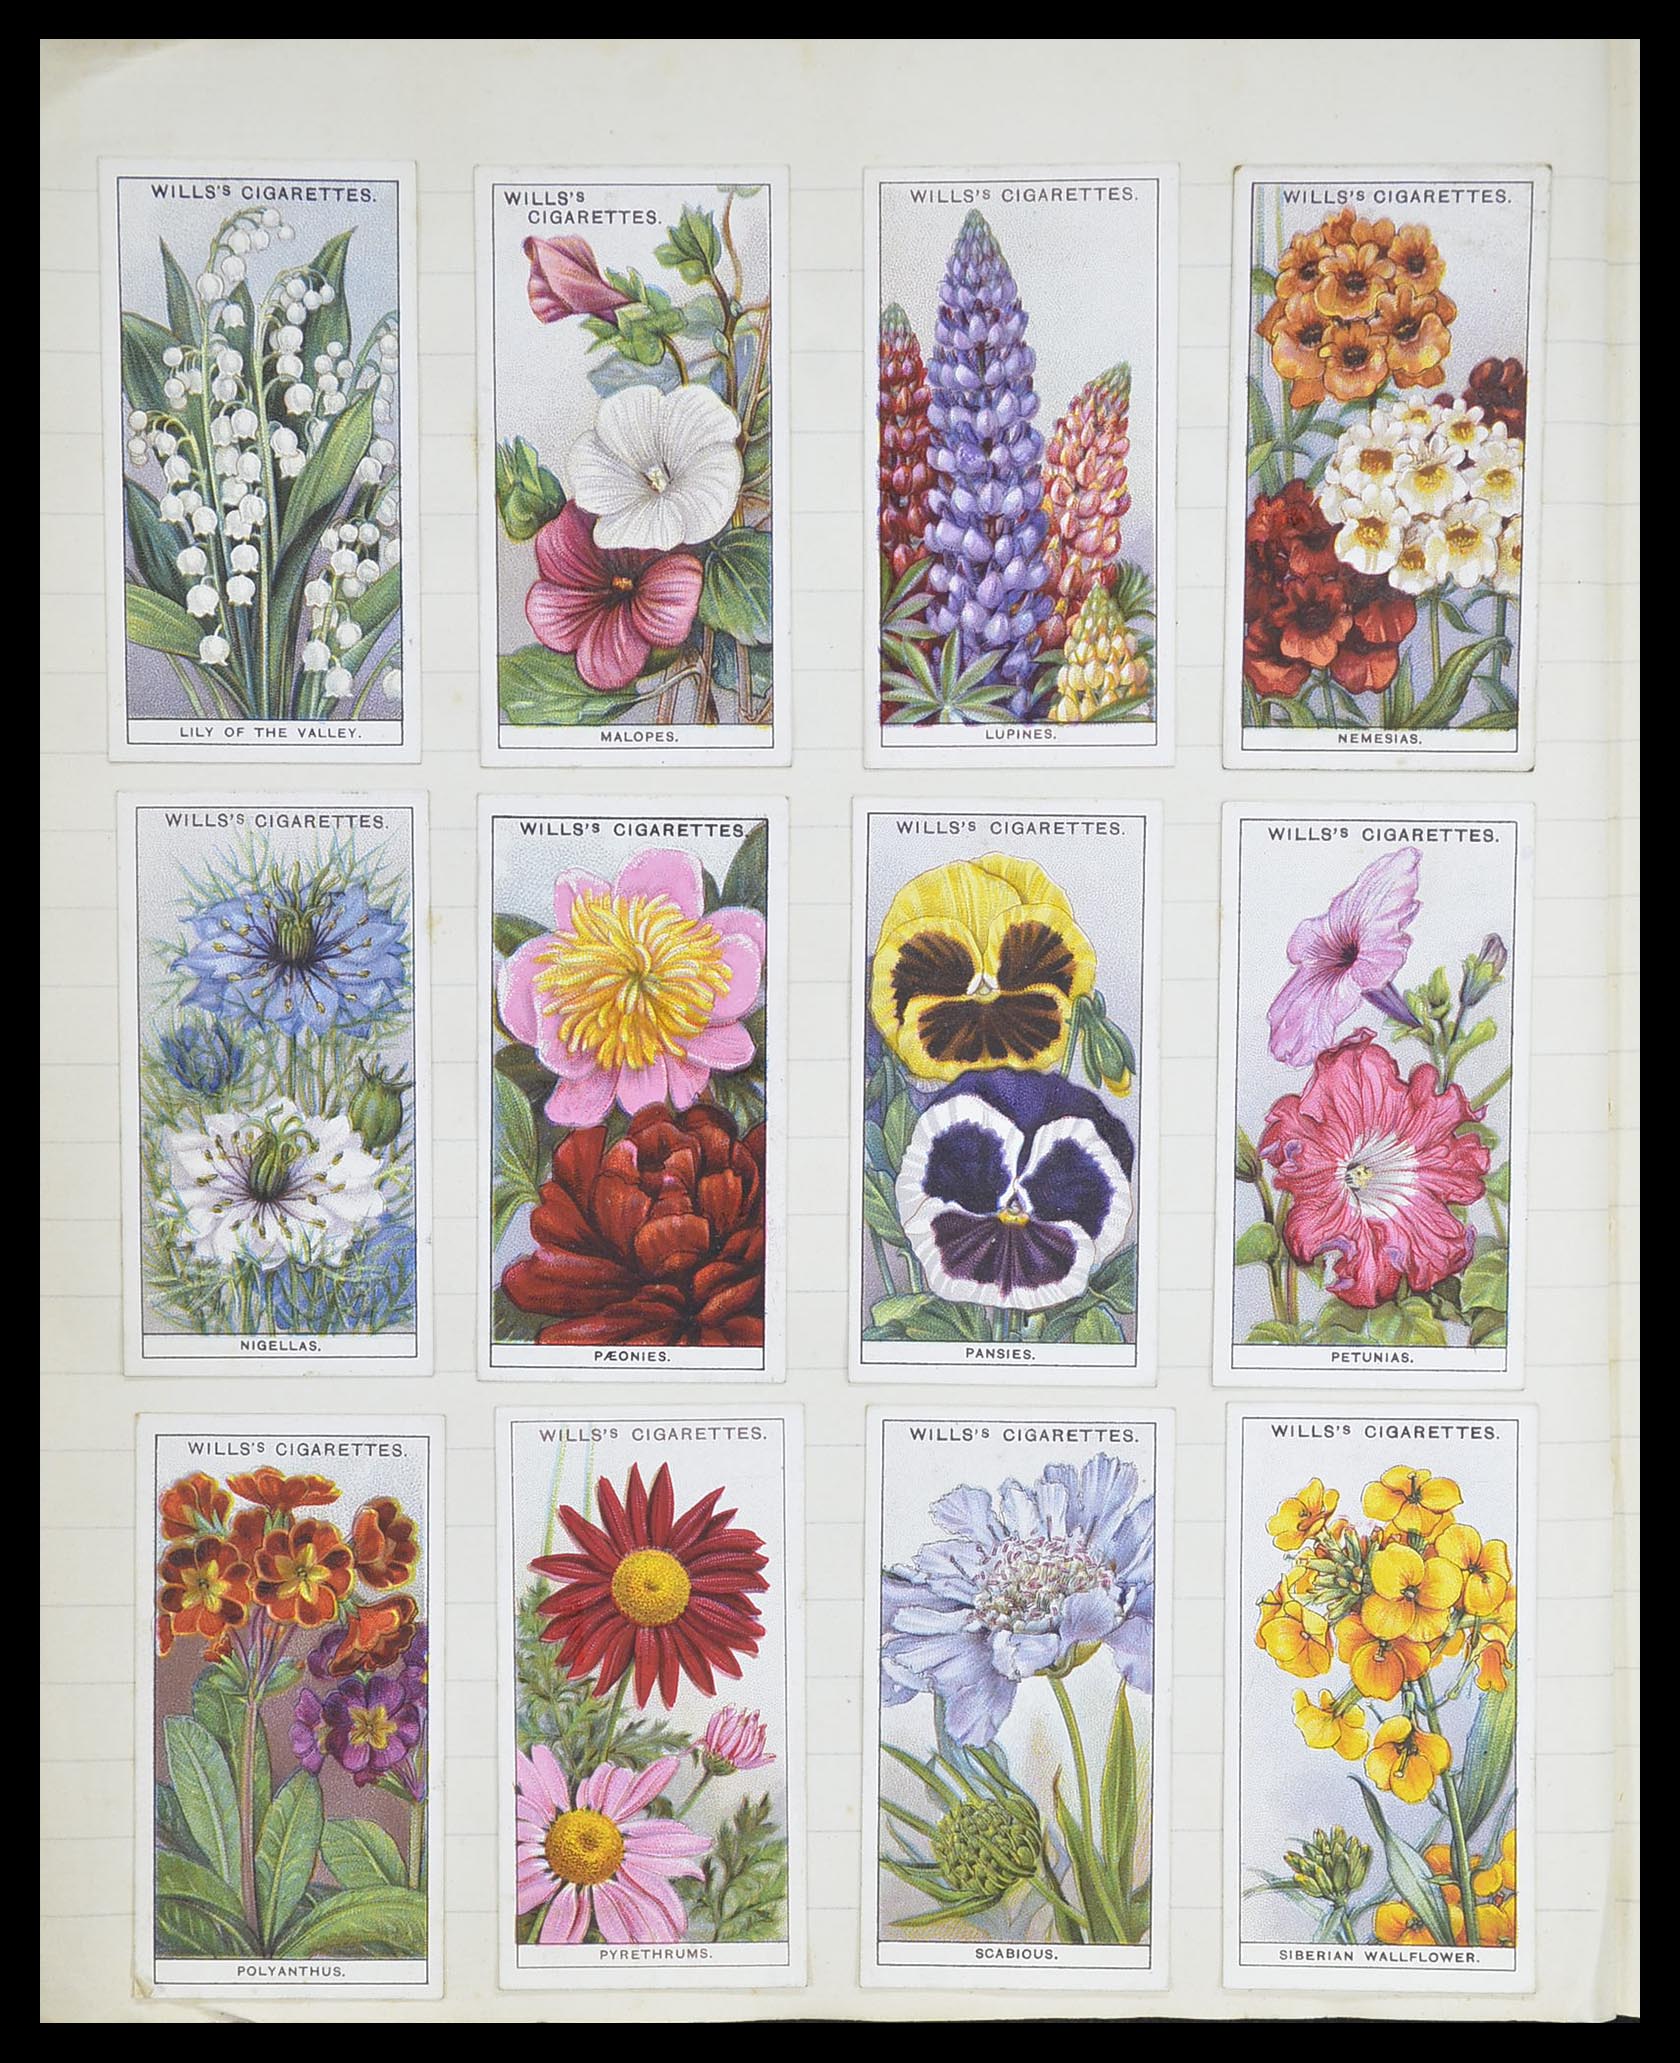 33444 076 - Stamp collection 33444 Great Britain cigarette cards.